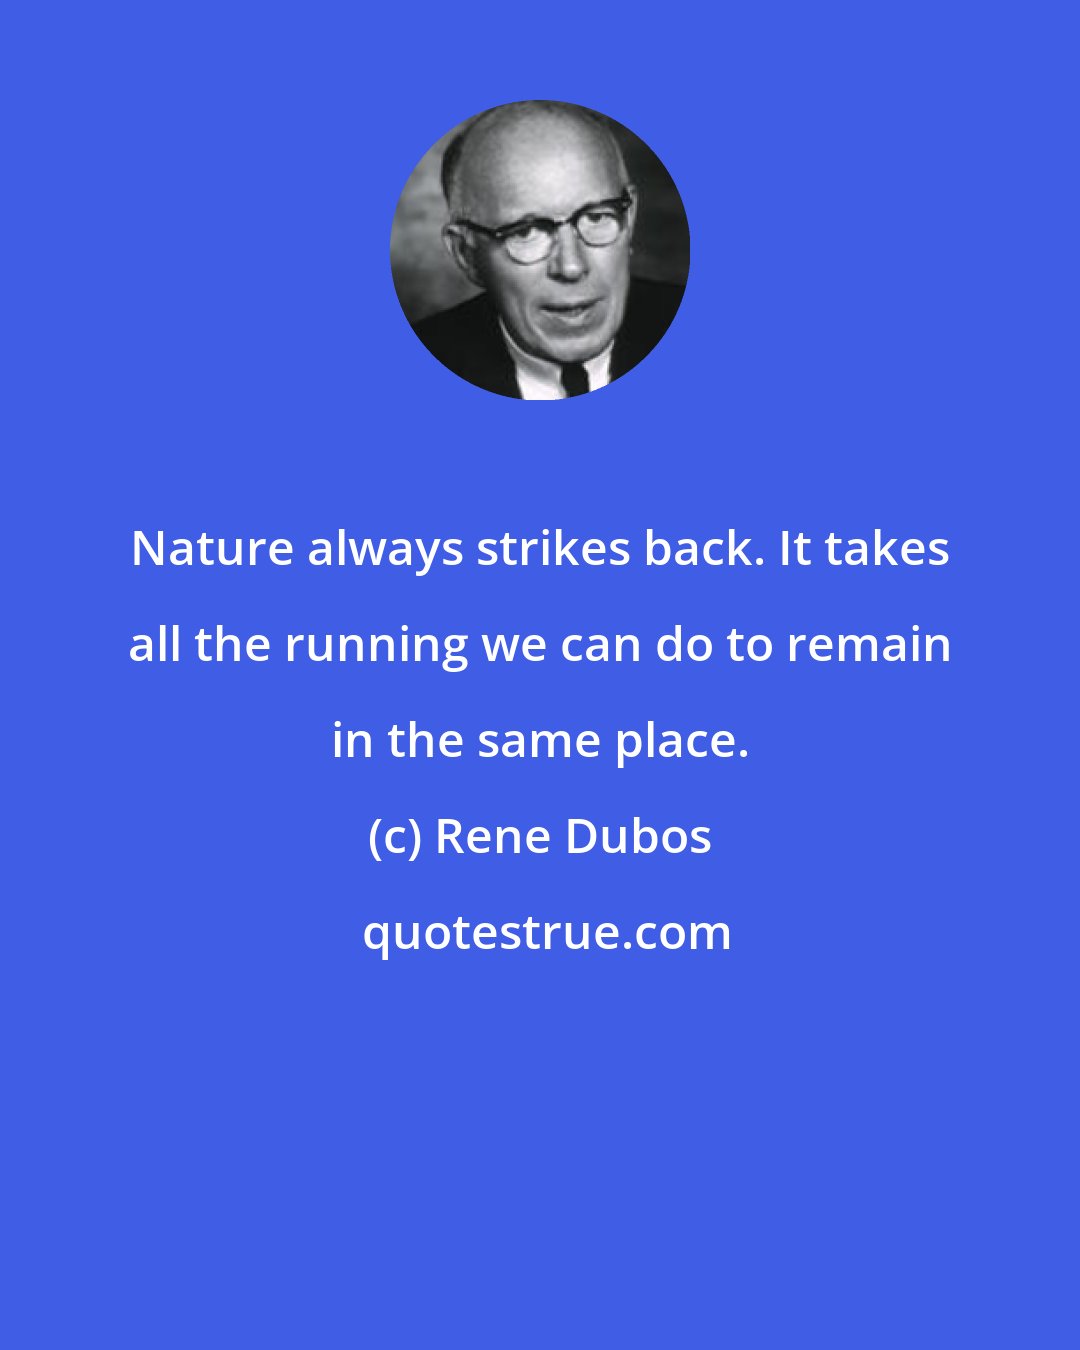 Rene Dubos: Nature always strikes back. It takes all the running we can do to remain in the same place.